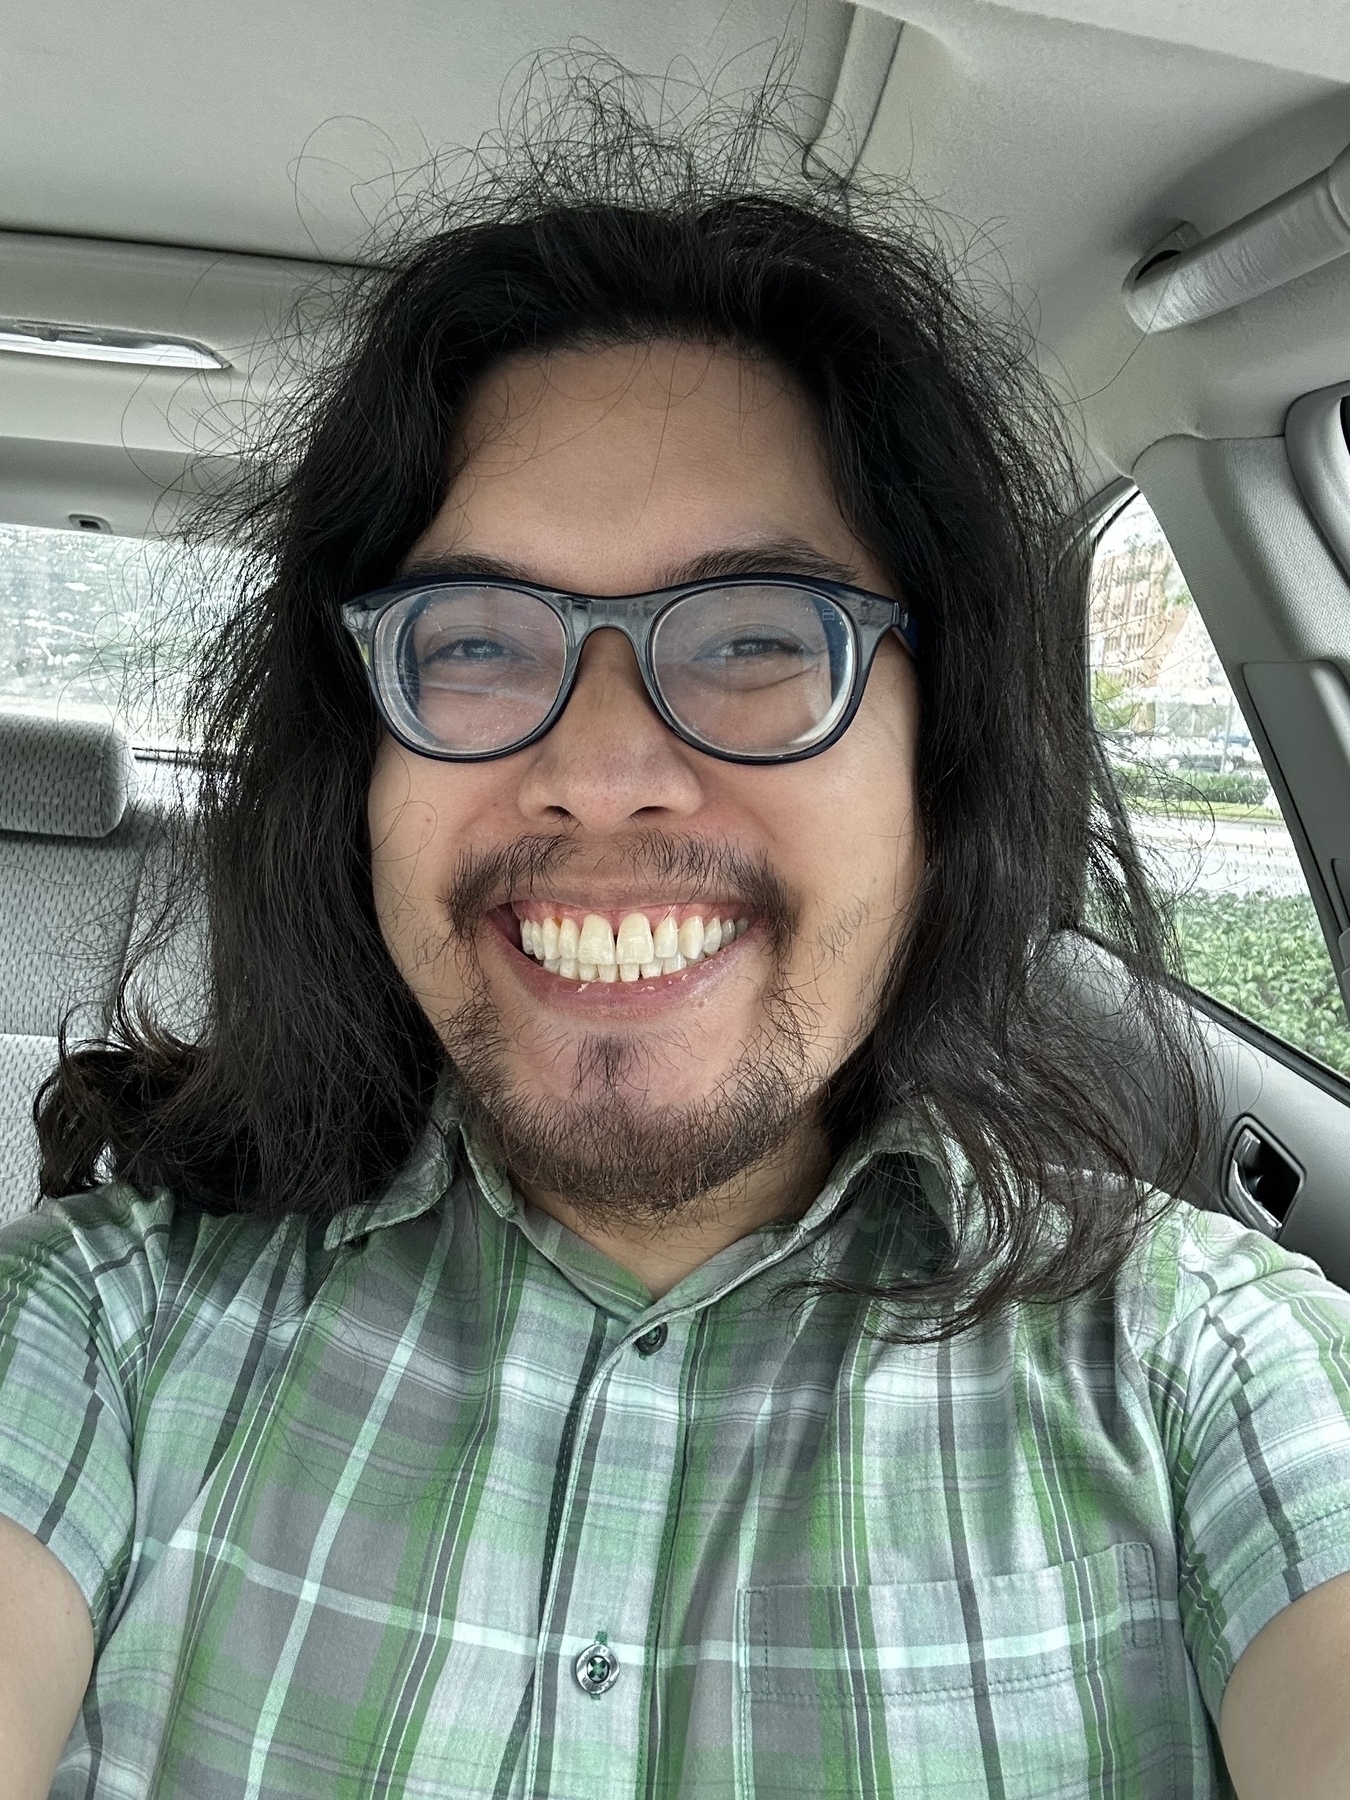 selfie of miguel a filipino man. he is smiling. he is inside a car. he has pong wavy black hair. he is wearing dark framed glasses. he is wearing a green shirt with buttons and a square pattern.